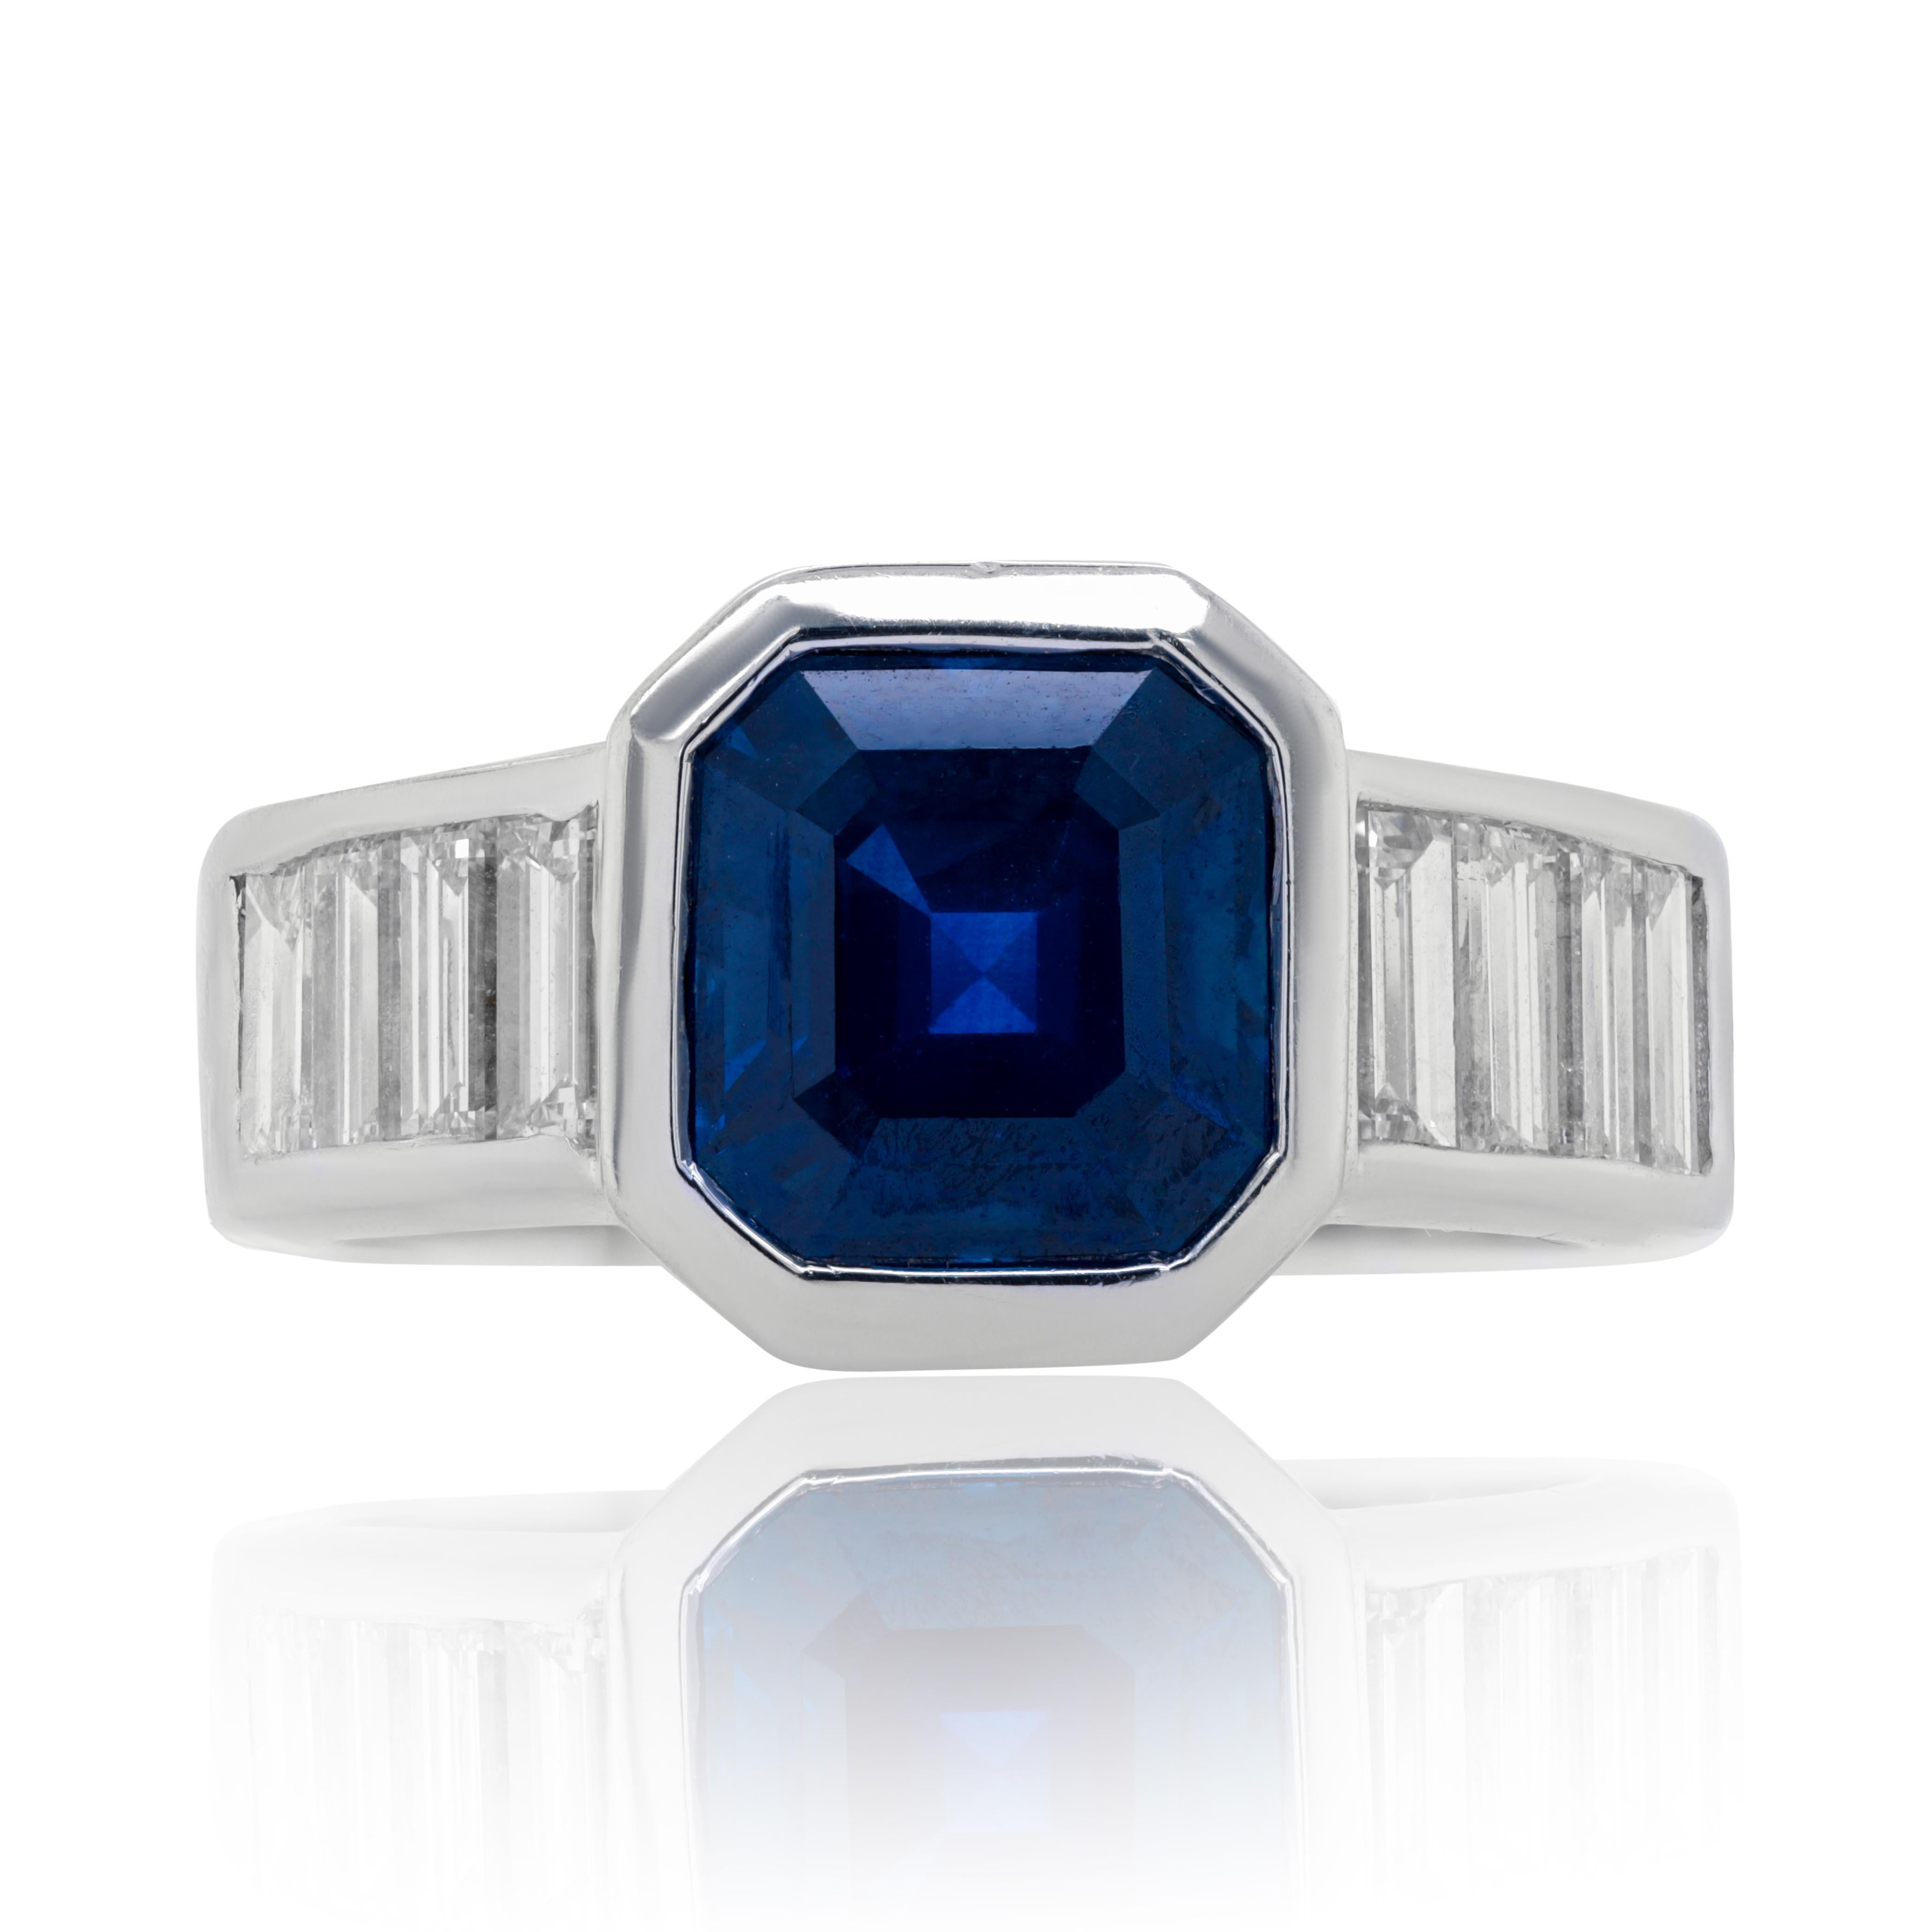 18k white gold sapphire and diamond ring features 3.31 ct asscher cut share sapphire and 1.15 carats of emerald diamonds on the side all in bezel setting
